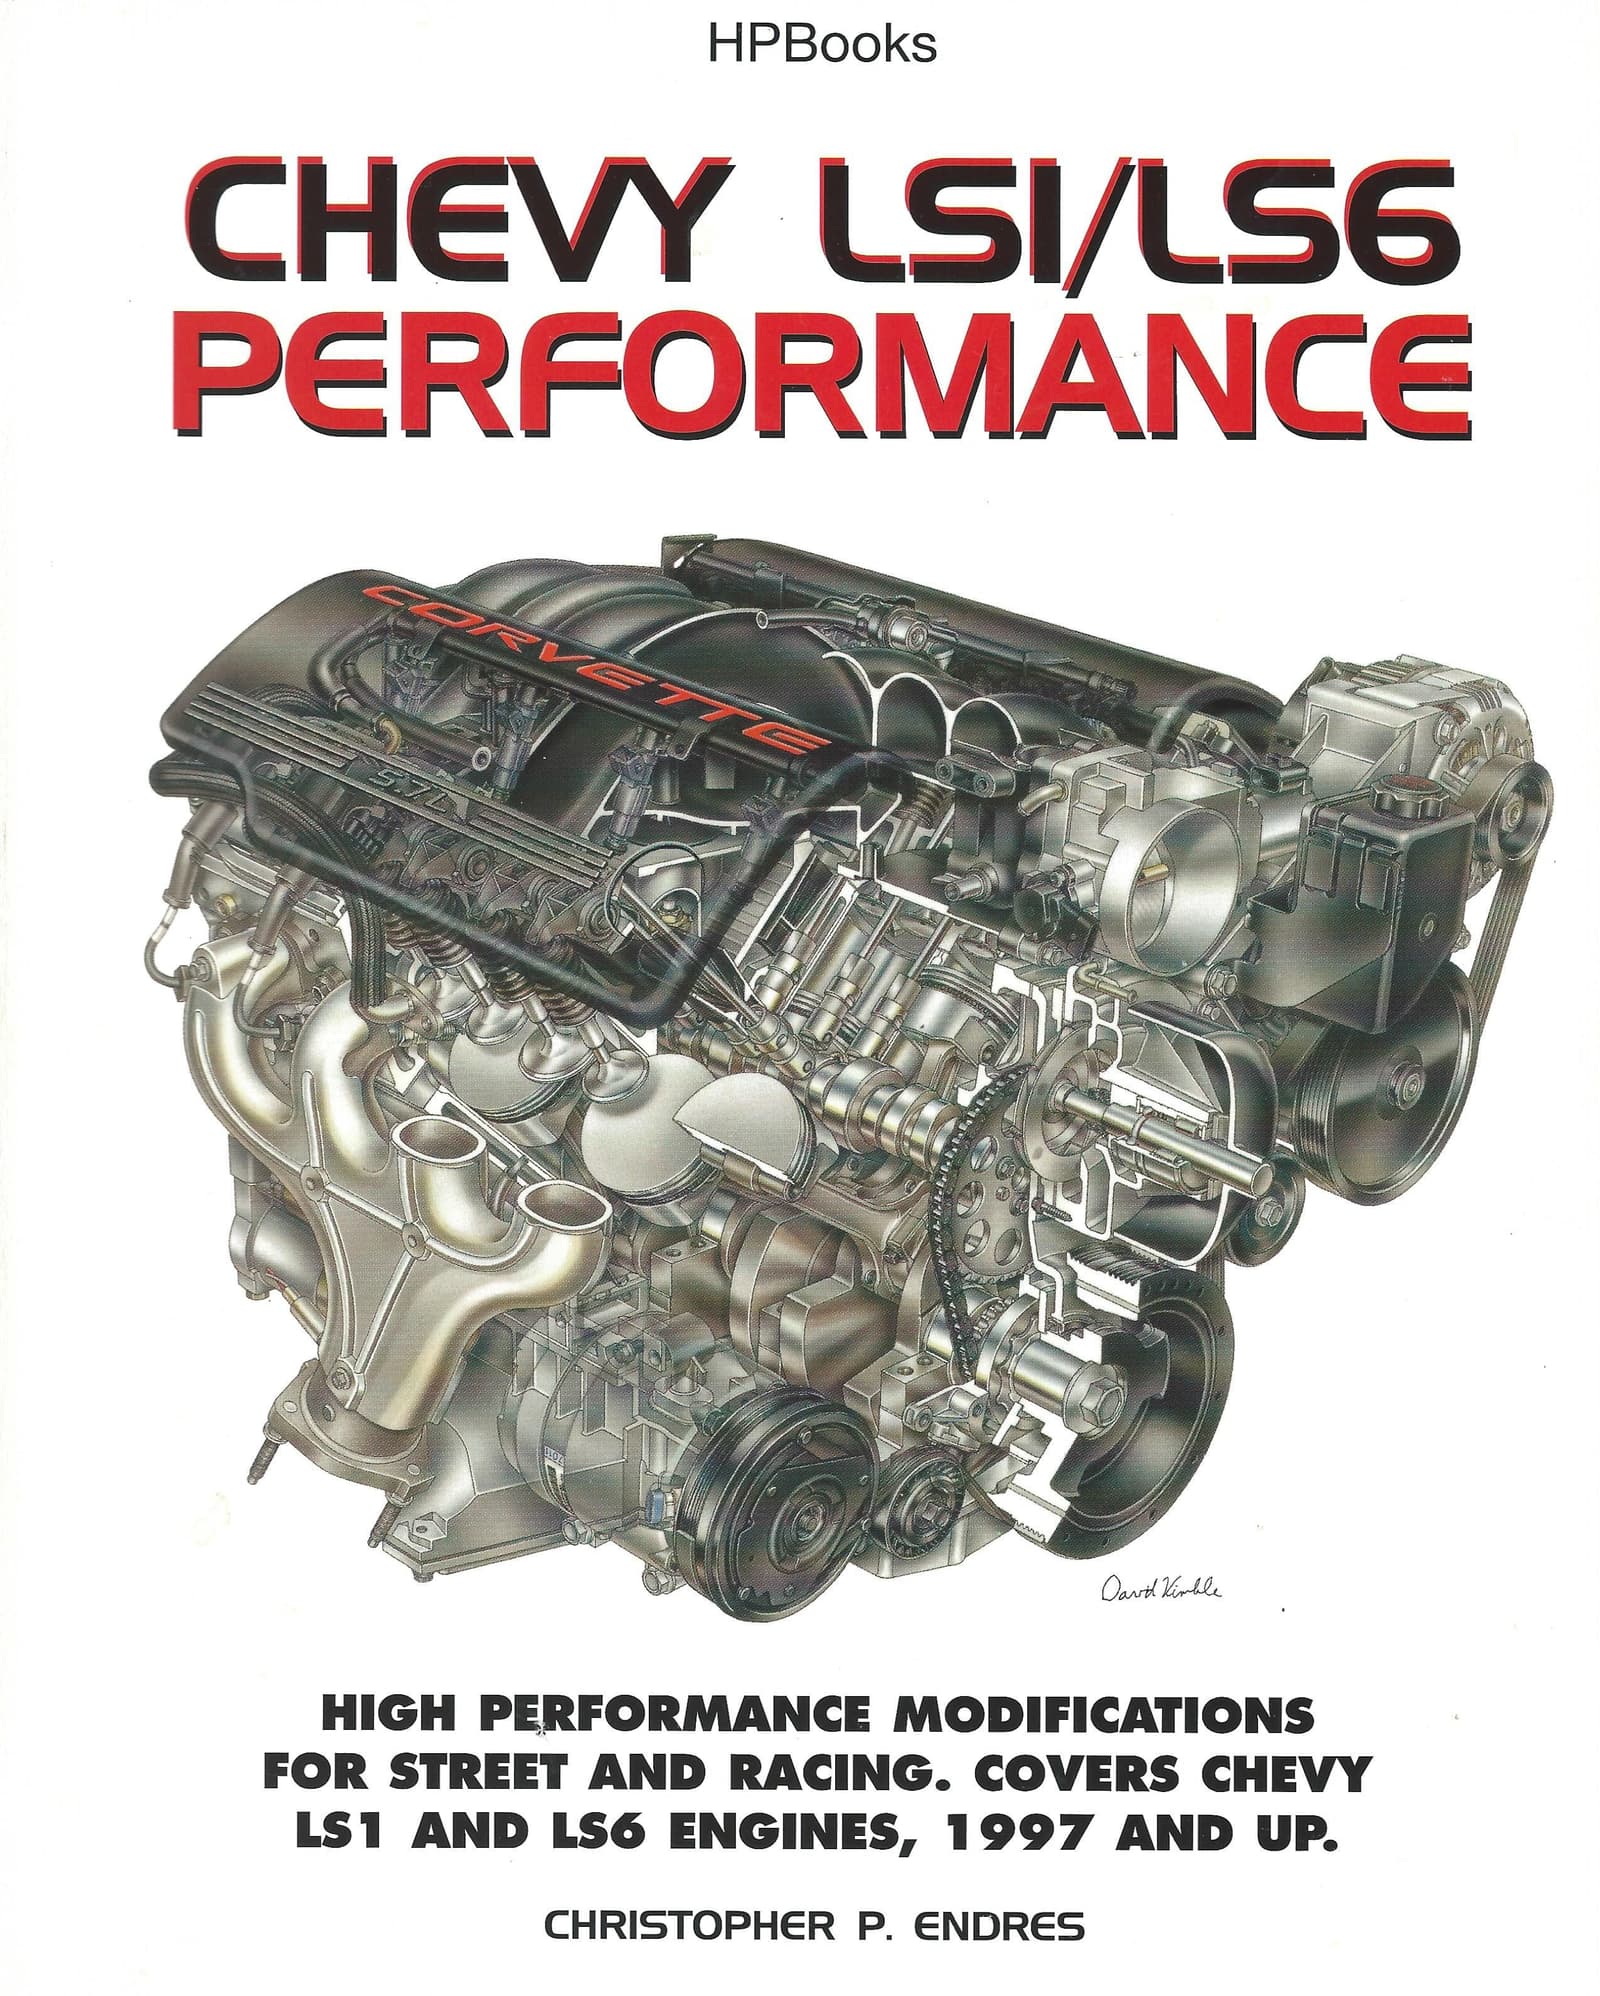 Miscellaneous - F Body manuals and Books from 2000 - Used - 2000 to 2004 Chevrolet Camaro - Aiken, SC 29803, United States